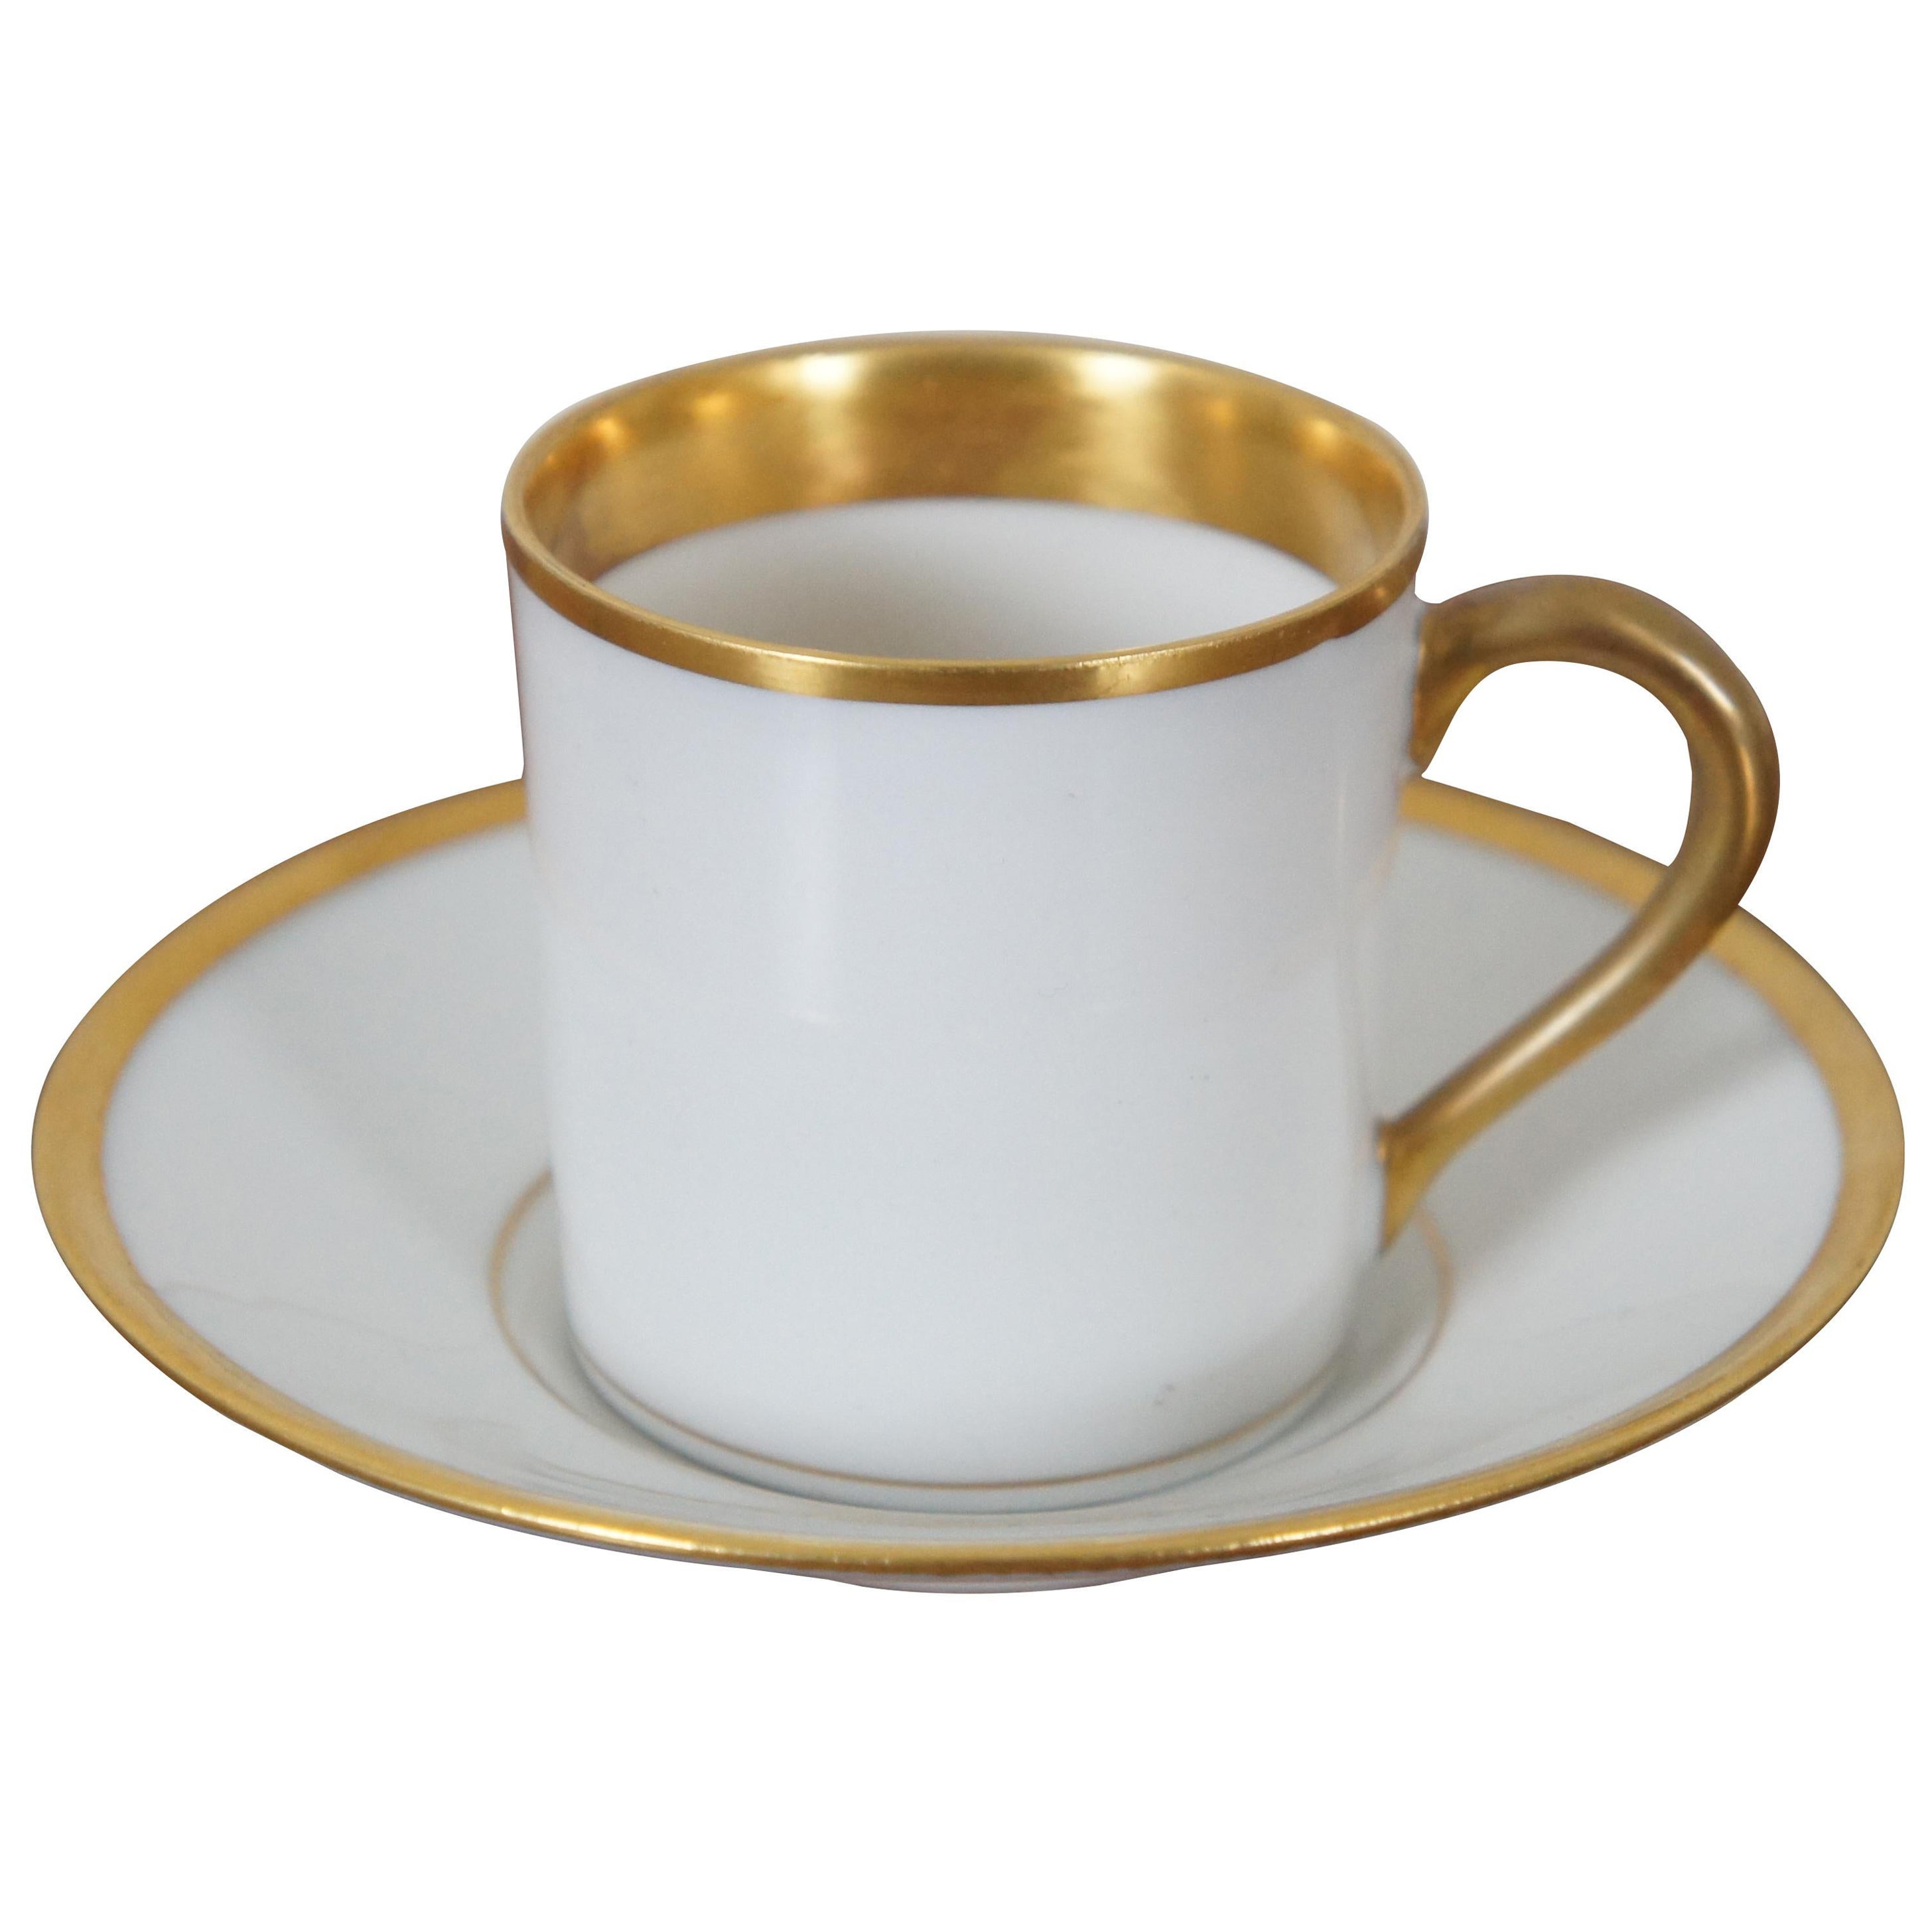 Antique French Limoges Gold Trim Demitasse Tea Coffee Cup & Saucer 5" For Sale